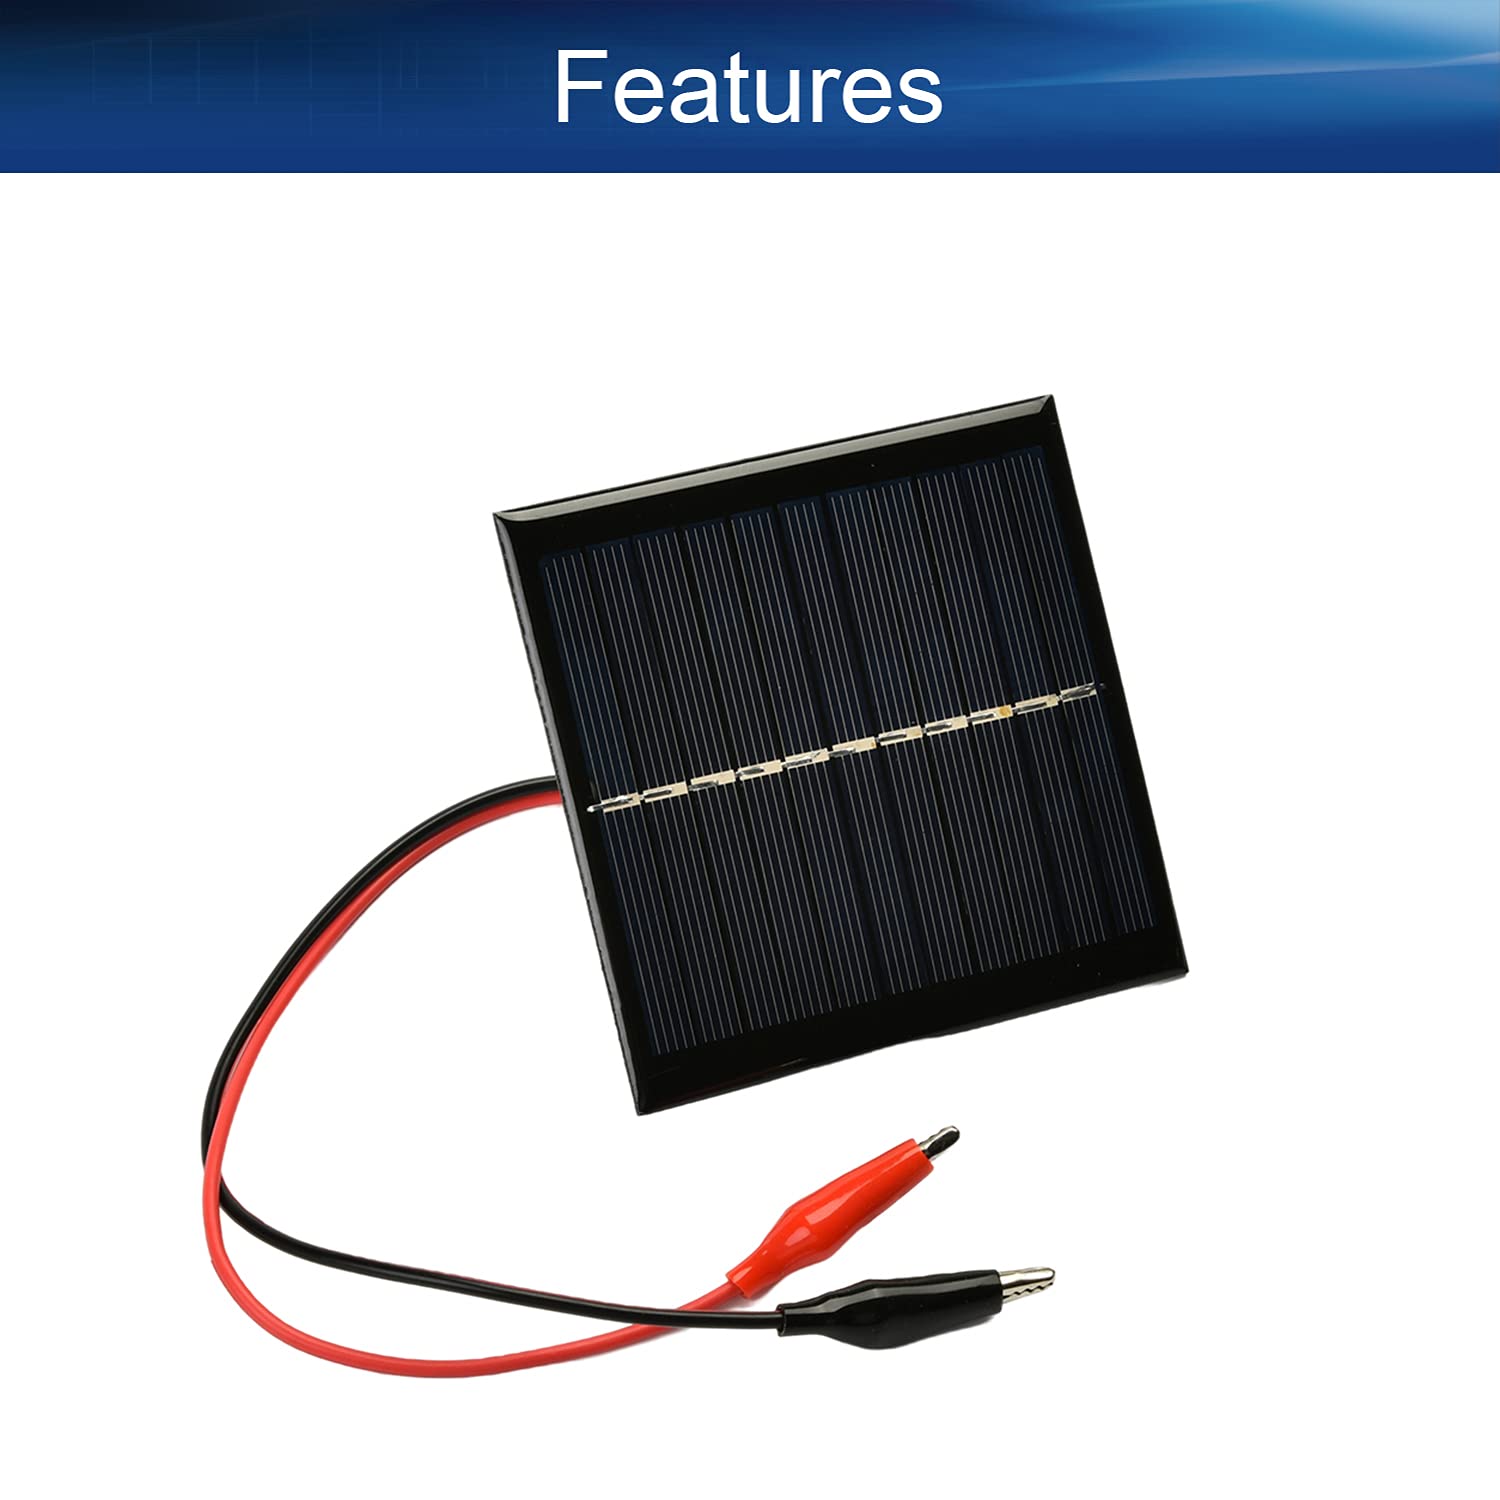 Heyiarbeit 1 Pcs 5.5V 1W Small Polysilicon Epoxy Resin DIY Solar Panel Module 95mm x 95mm/3.74" x 3.74" with Alligator Clip for Outdoor Travel